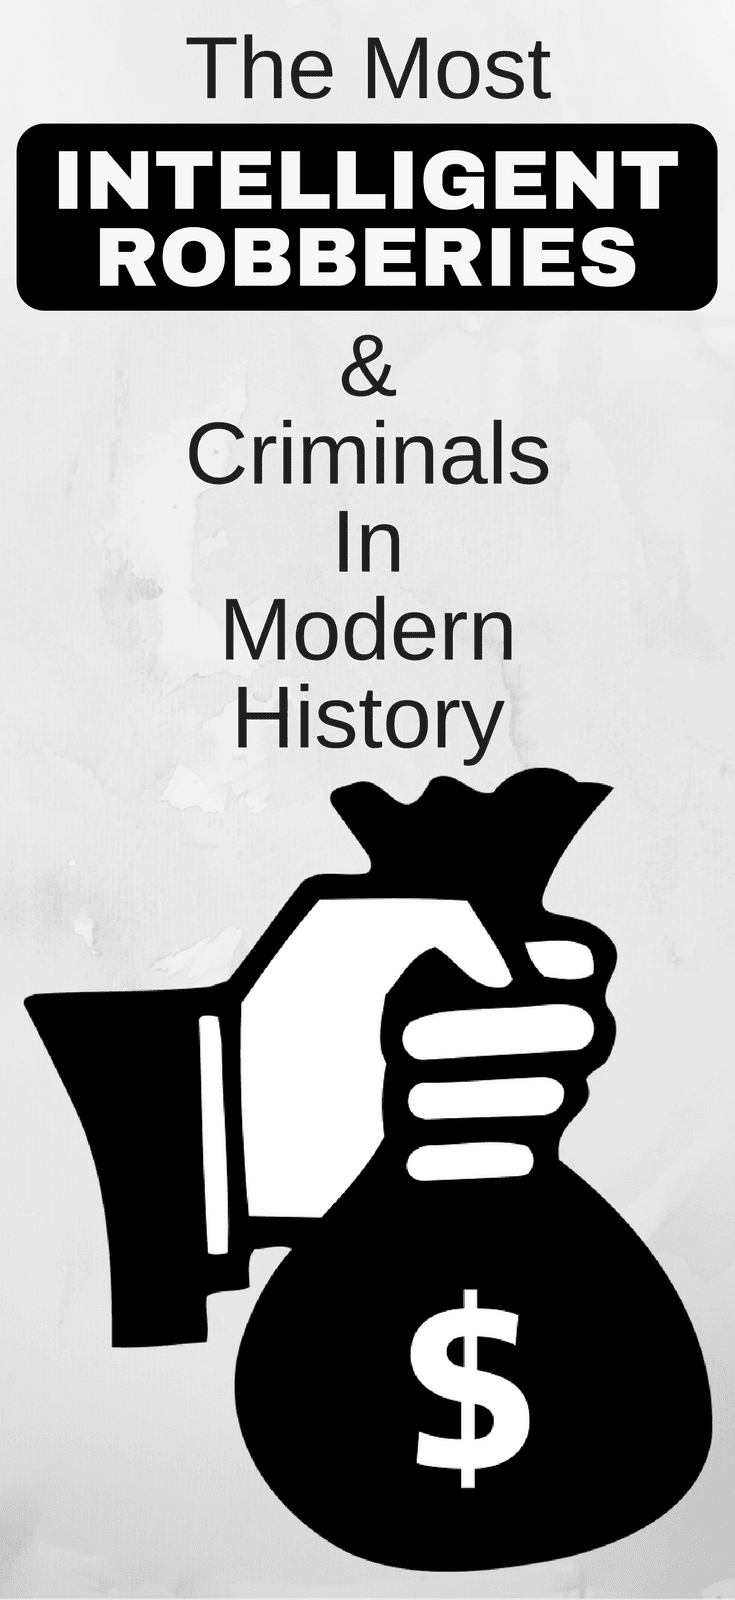 The Most Intelligent Robberies & Criminals In Modern History